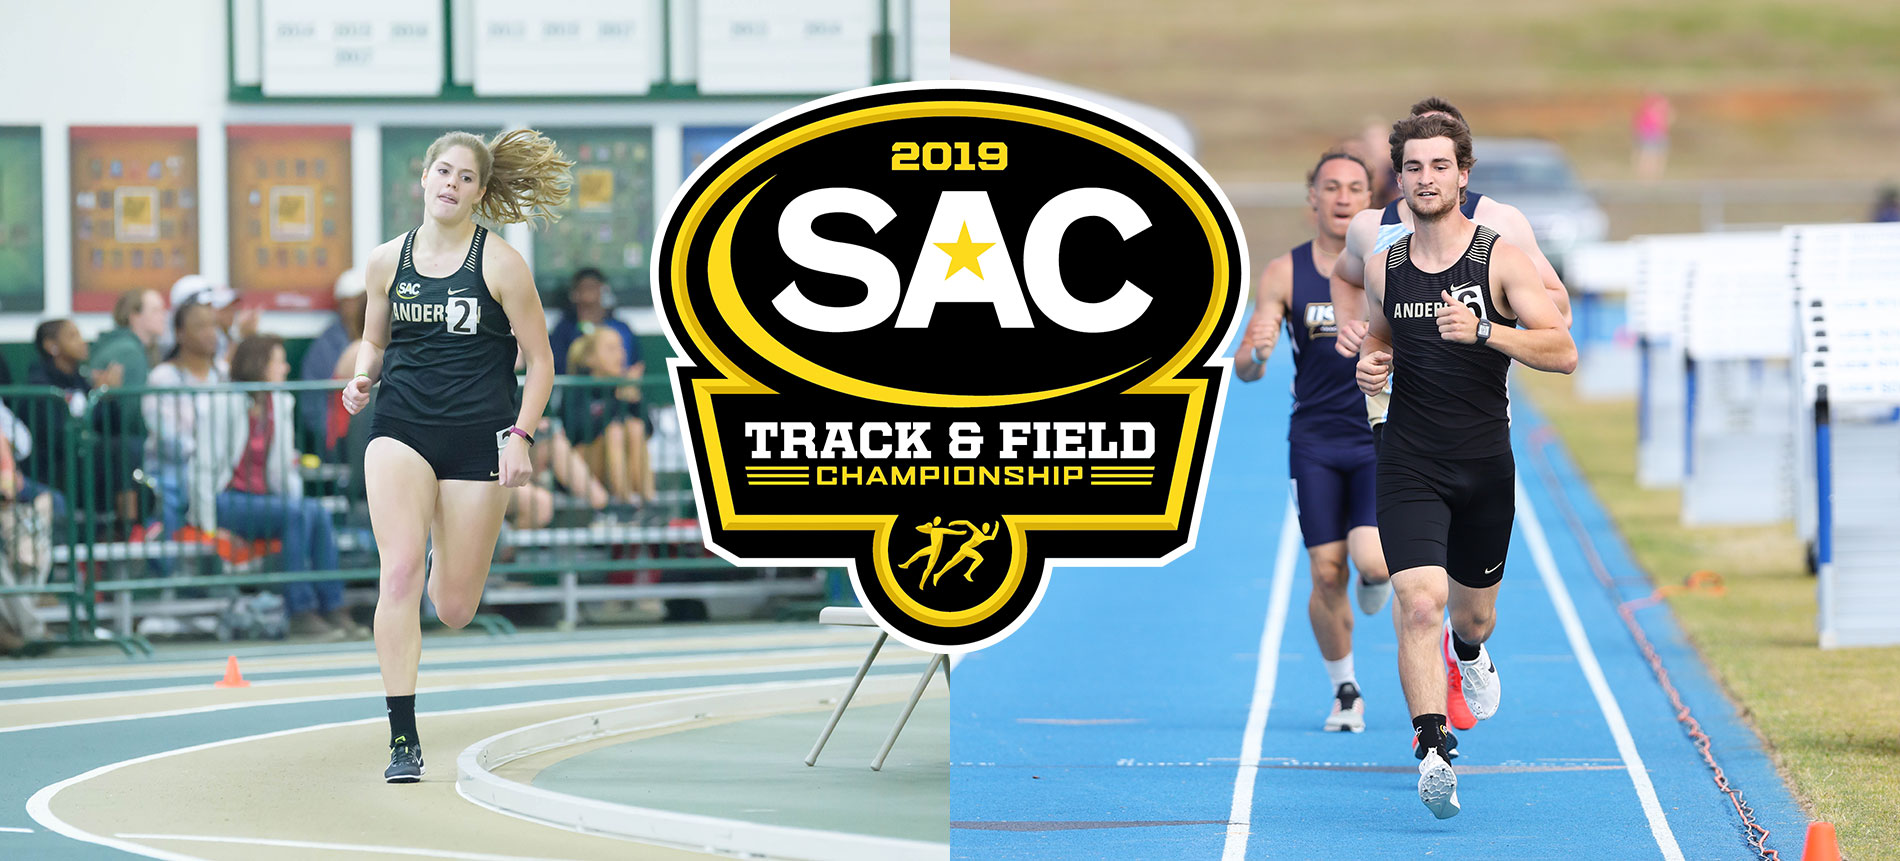 Women’s Track and Field Fourth Following Opening Day of SAC Track and Field Championships; Trojan Men are Fifth